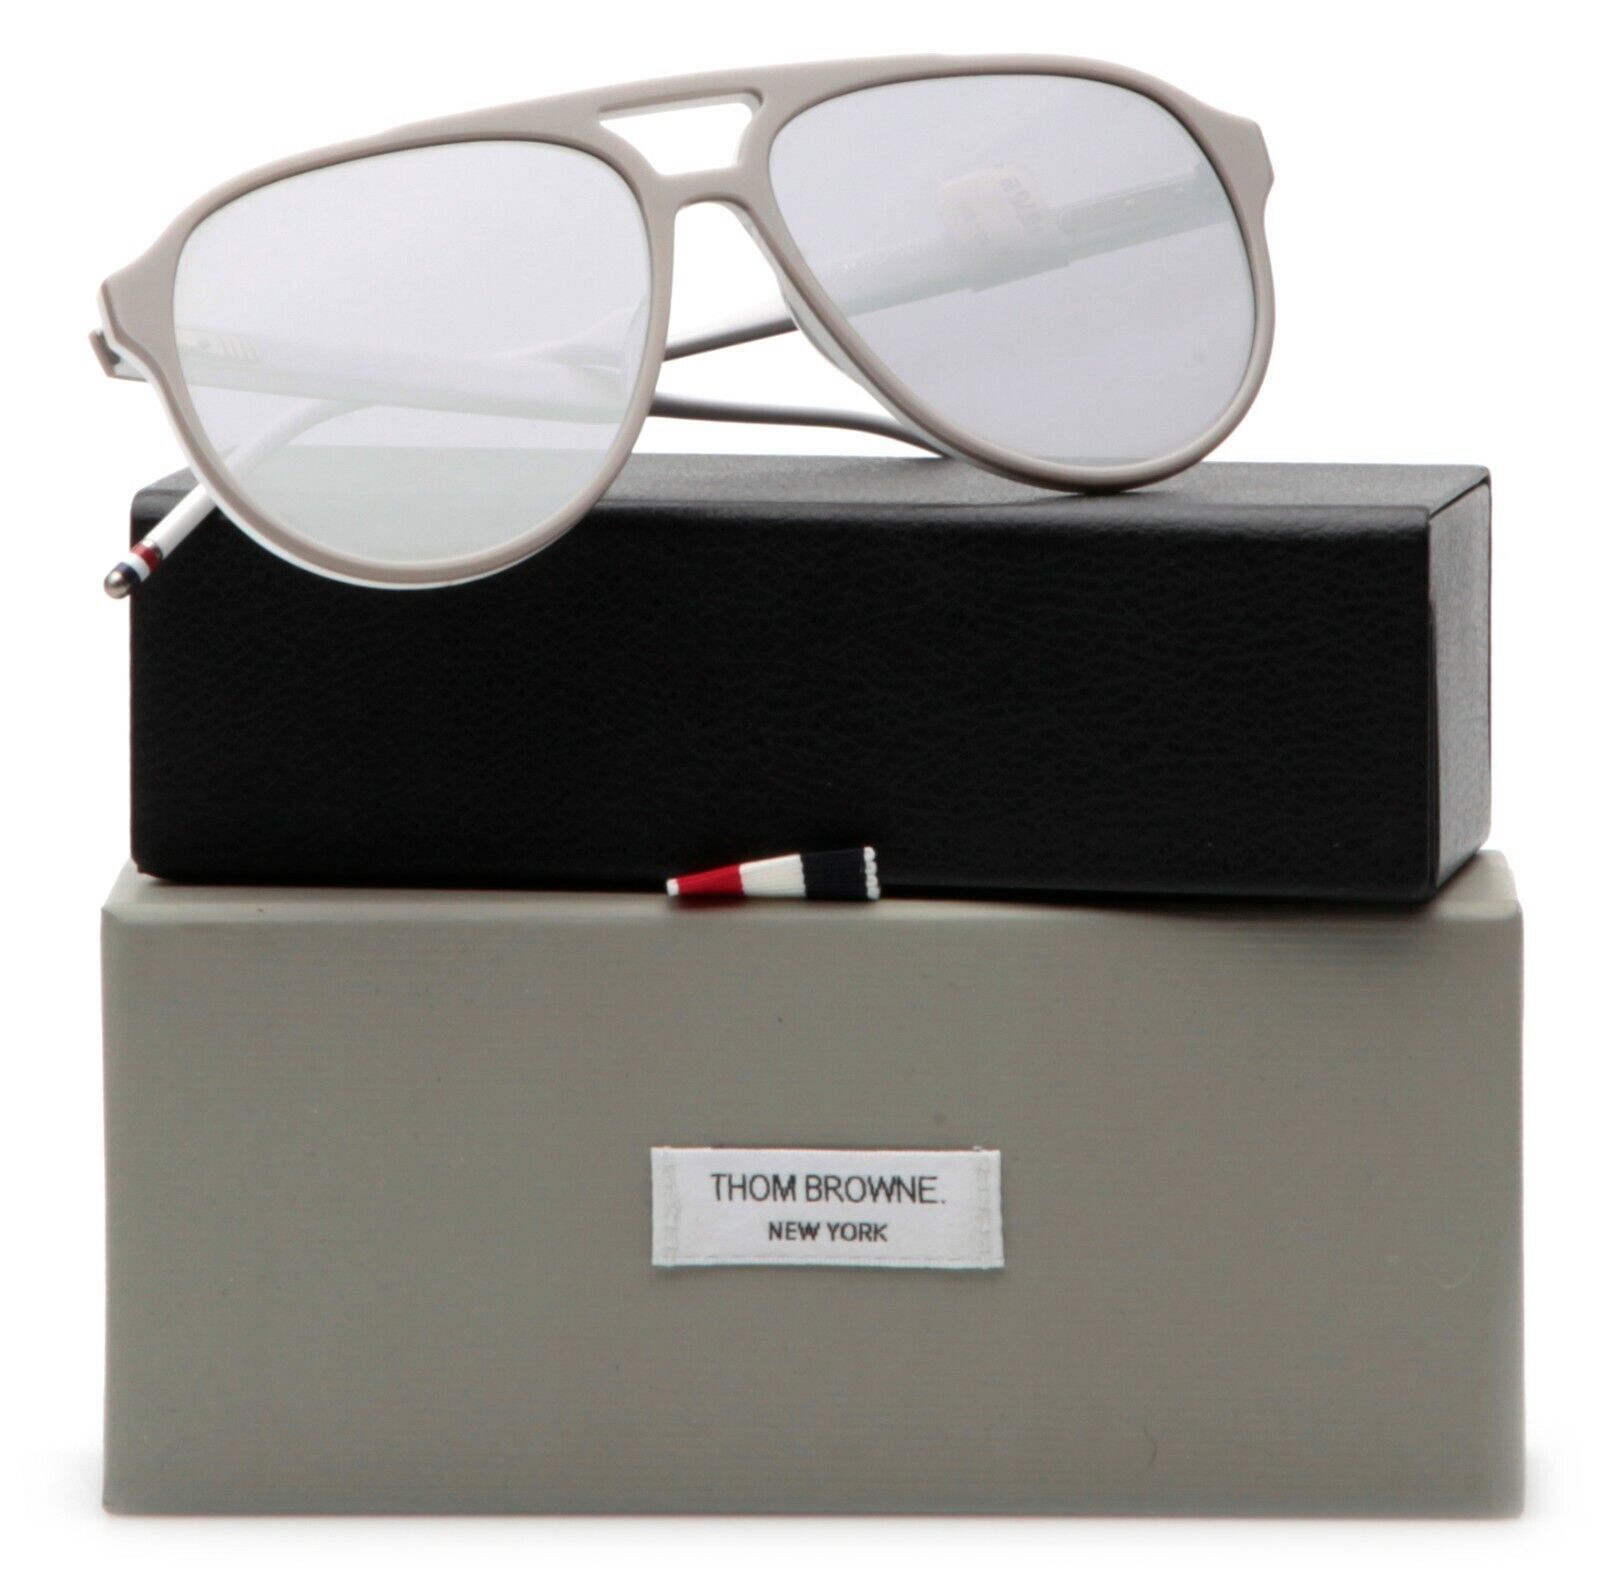 Primary image for New Thom Browne TBS408-63-02 GRY-WHT Grey White Sunglasses 